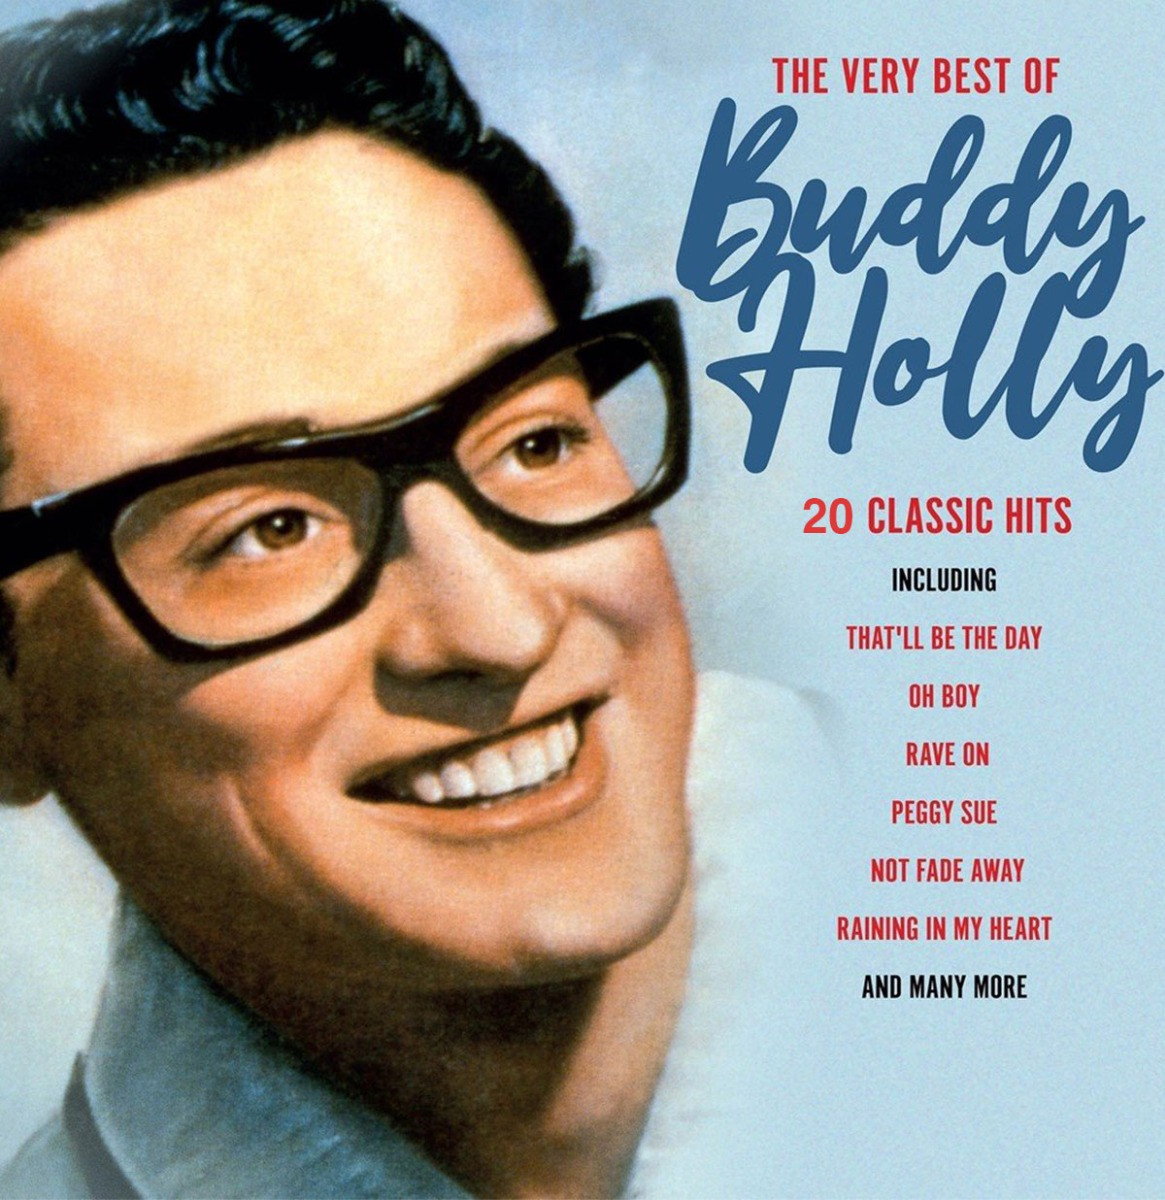 Buddy Holly - 20 Classic Hits LP